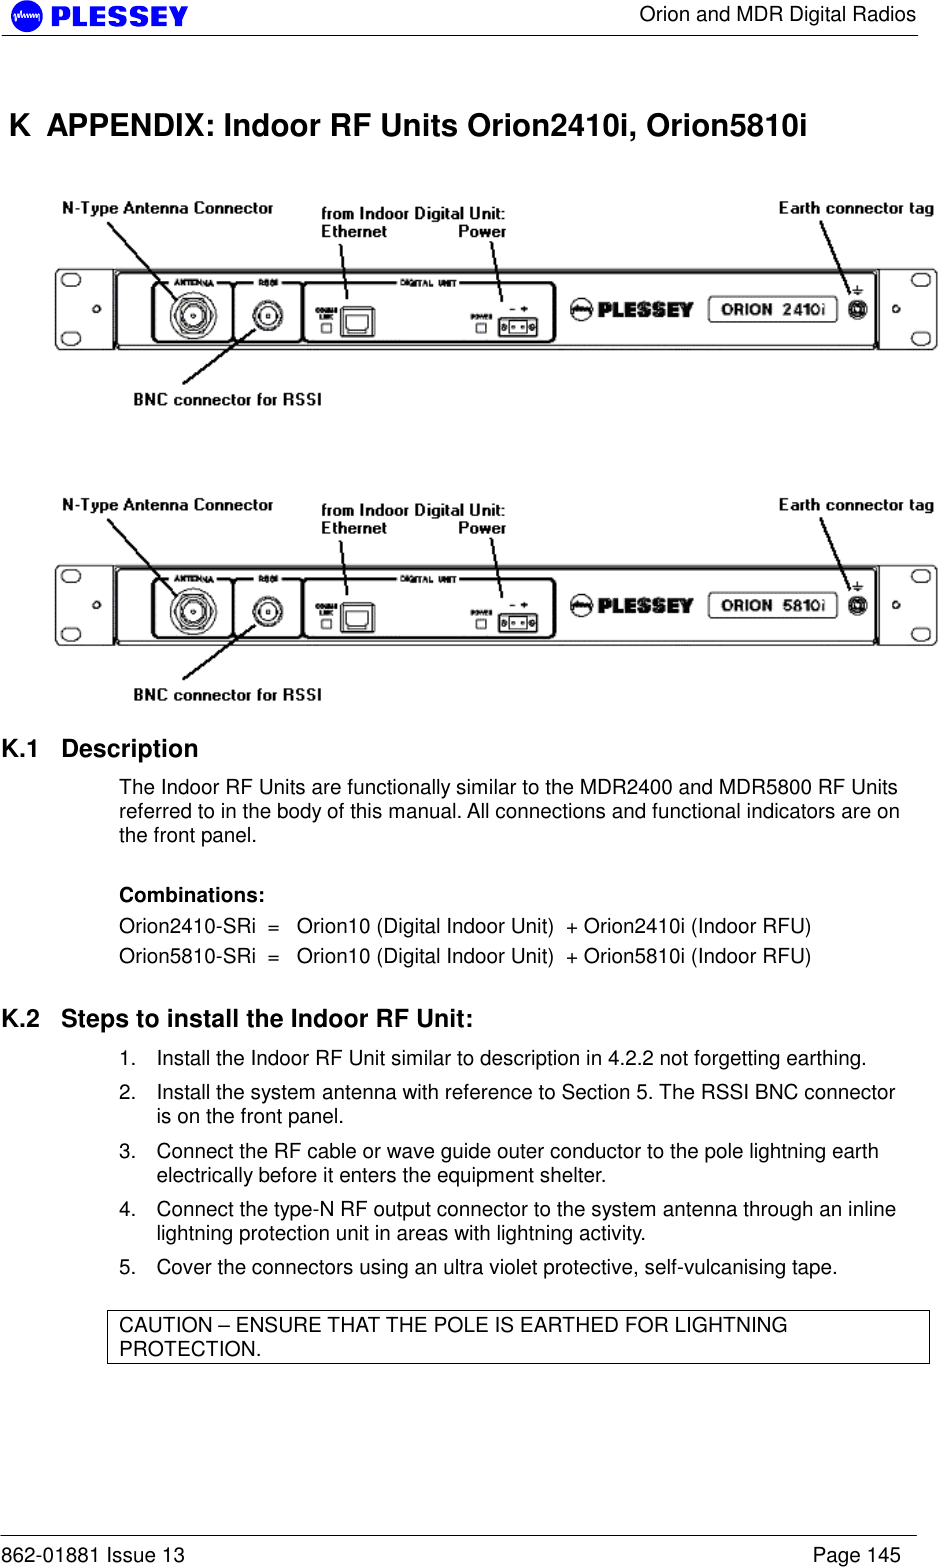      Orion and MDR Digital Radios  862-01881 Issue 13    Page 145 K  APPENDIX: Indoor RF Units Orion2410i, Orion5810i     K.1 Description The Indoor RF Units are functionally similar to the MDR2400 and MDR5800 RF Units referred to in the body of this manual. All connections and functional indicators are on the front panel.  Combinations: Orion2410-SRi  =   Orion10 (Digital Indoor Unit)  + Orion2410i (Indoor RFU) Orion5810-SRi  =   Orion10 (Digital Indoor Unit)  + Orion5810i (Indoor RFU)  K.2  Steps to install the Indoor RF Unit: 1.  Install the Indoor RF Unit similar to description in 4.2.2 not forgetting earthing. 2.  Install the system antenna with reference to Section 5. The RSSI BNC connector is on the front panel. 3.  Connect the RF cable or wave guide outer conductor to the pole lightning earth electrically before it enters the equipment shelter. 4.  Connect the type-N RF output connector to the system antenna through an inline lightning protection unit in areas with lightning activity. 5.  Cover the connectors using an ultra violet protective, self-vulcanising tape.  CAUTION – ENSURE THAT THE POLE IS EARTHED FOR LIGHTNING PROTECTION.   